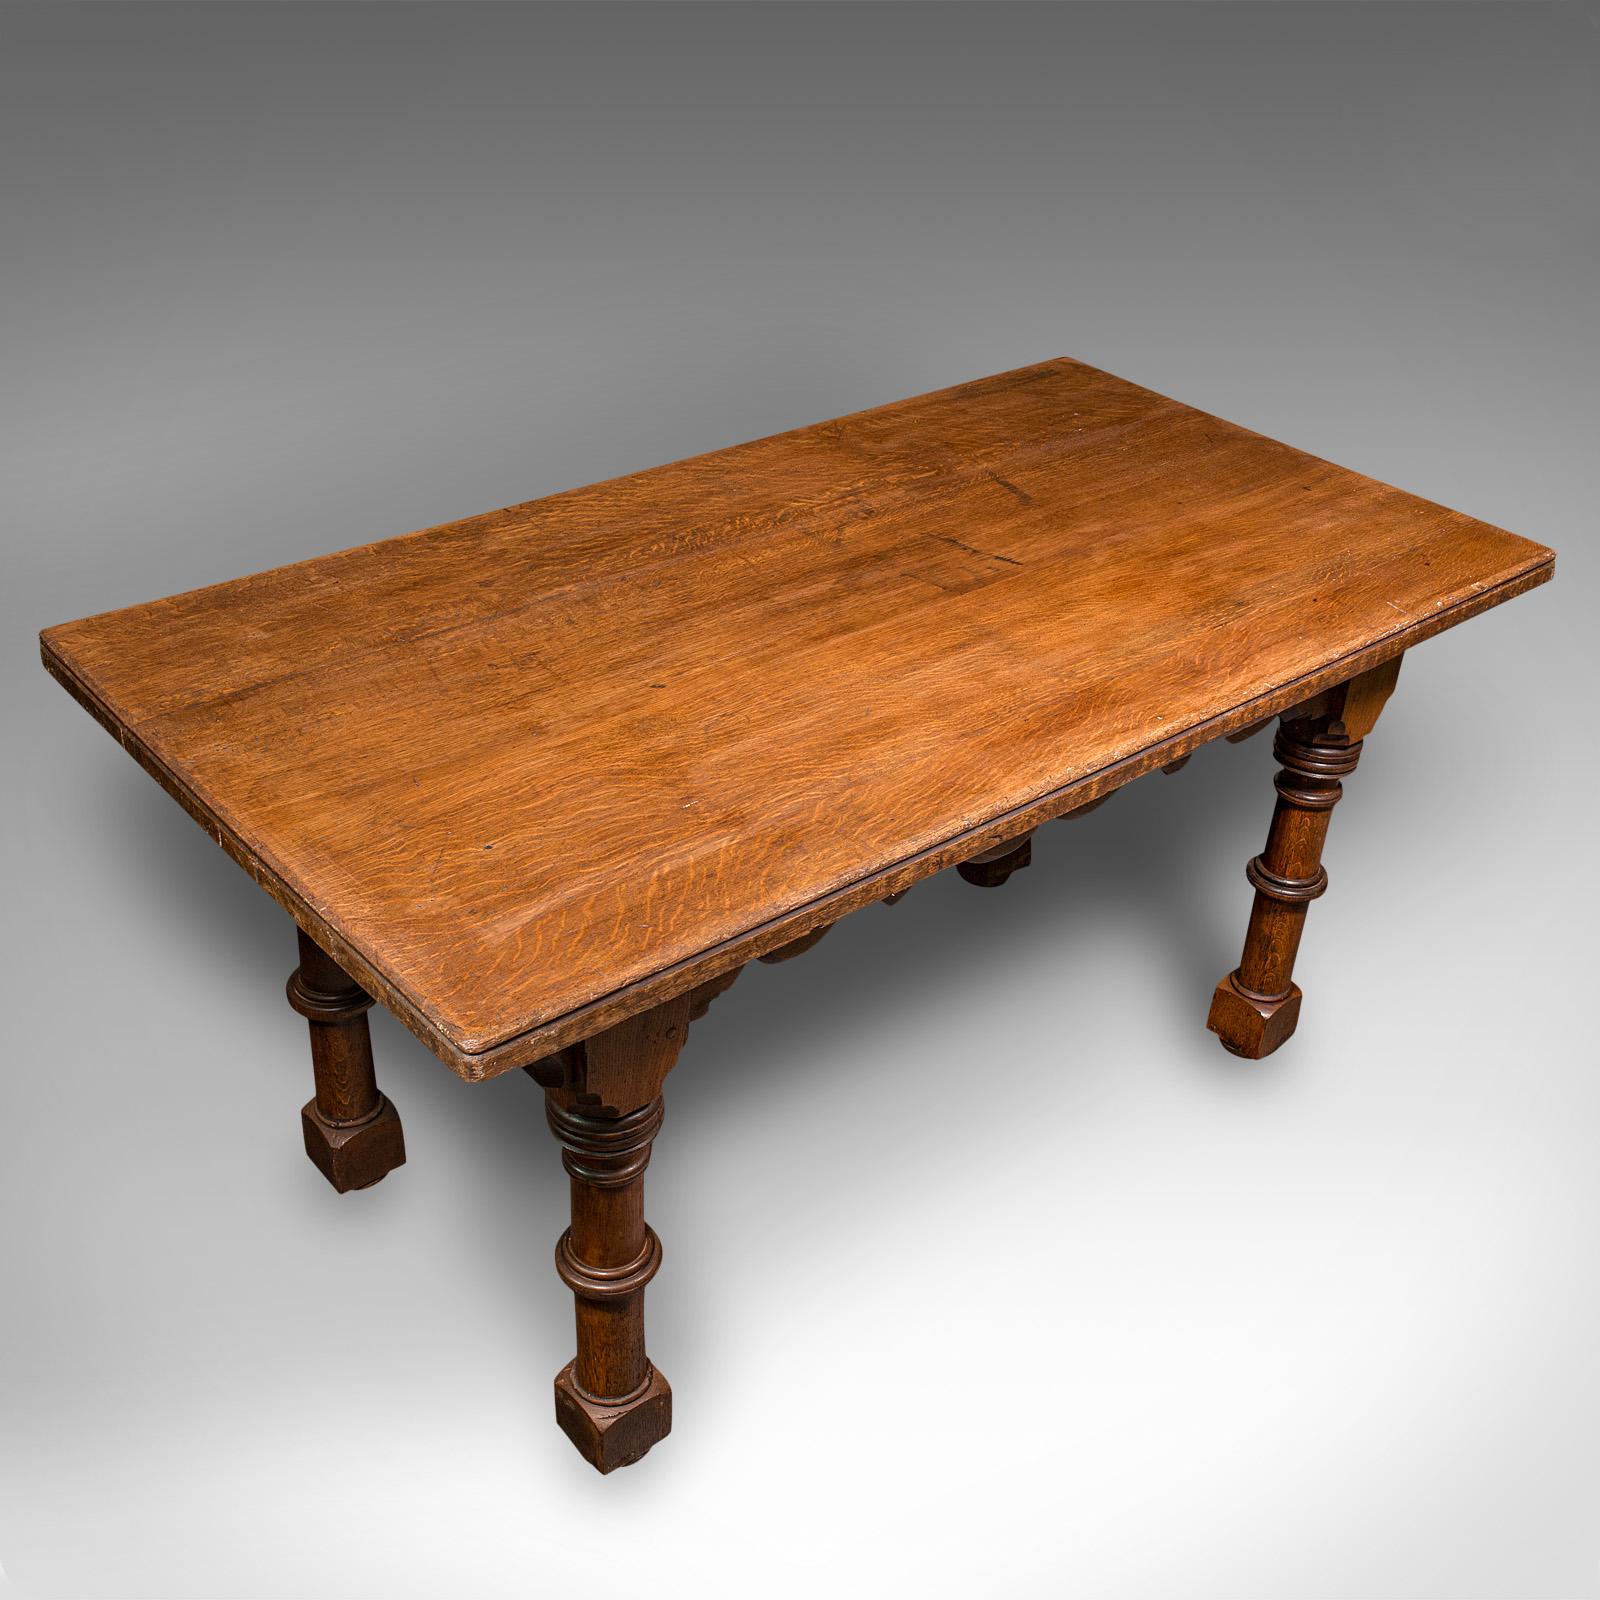 19th Century Antique Kitchen Dining Table, Scottish, Oak, 4-6 Seat, Gothic Revival, Victorian